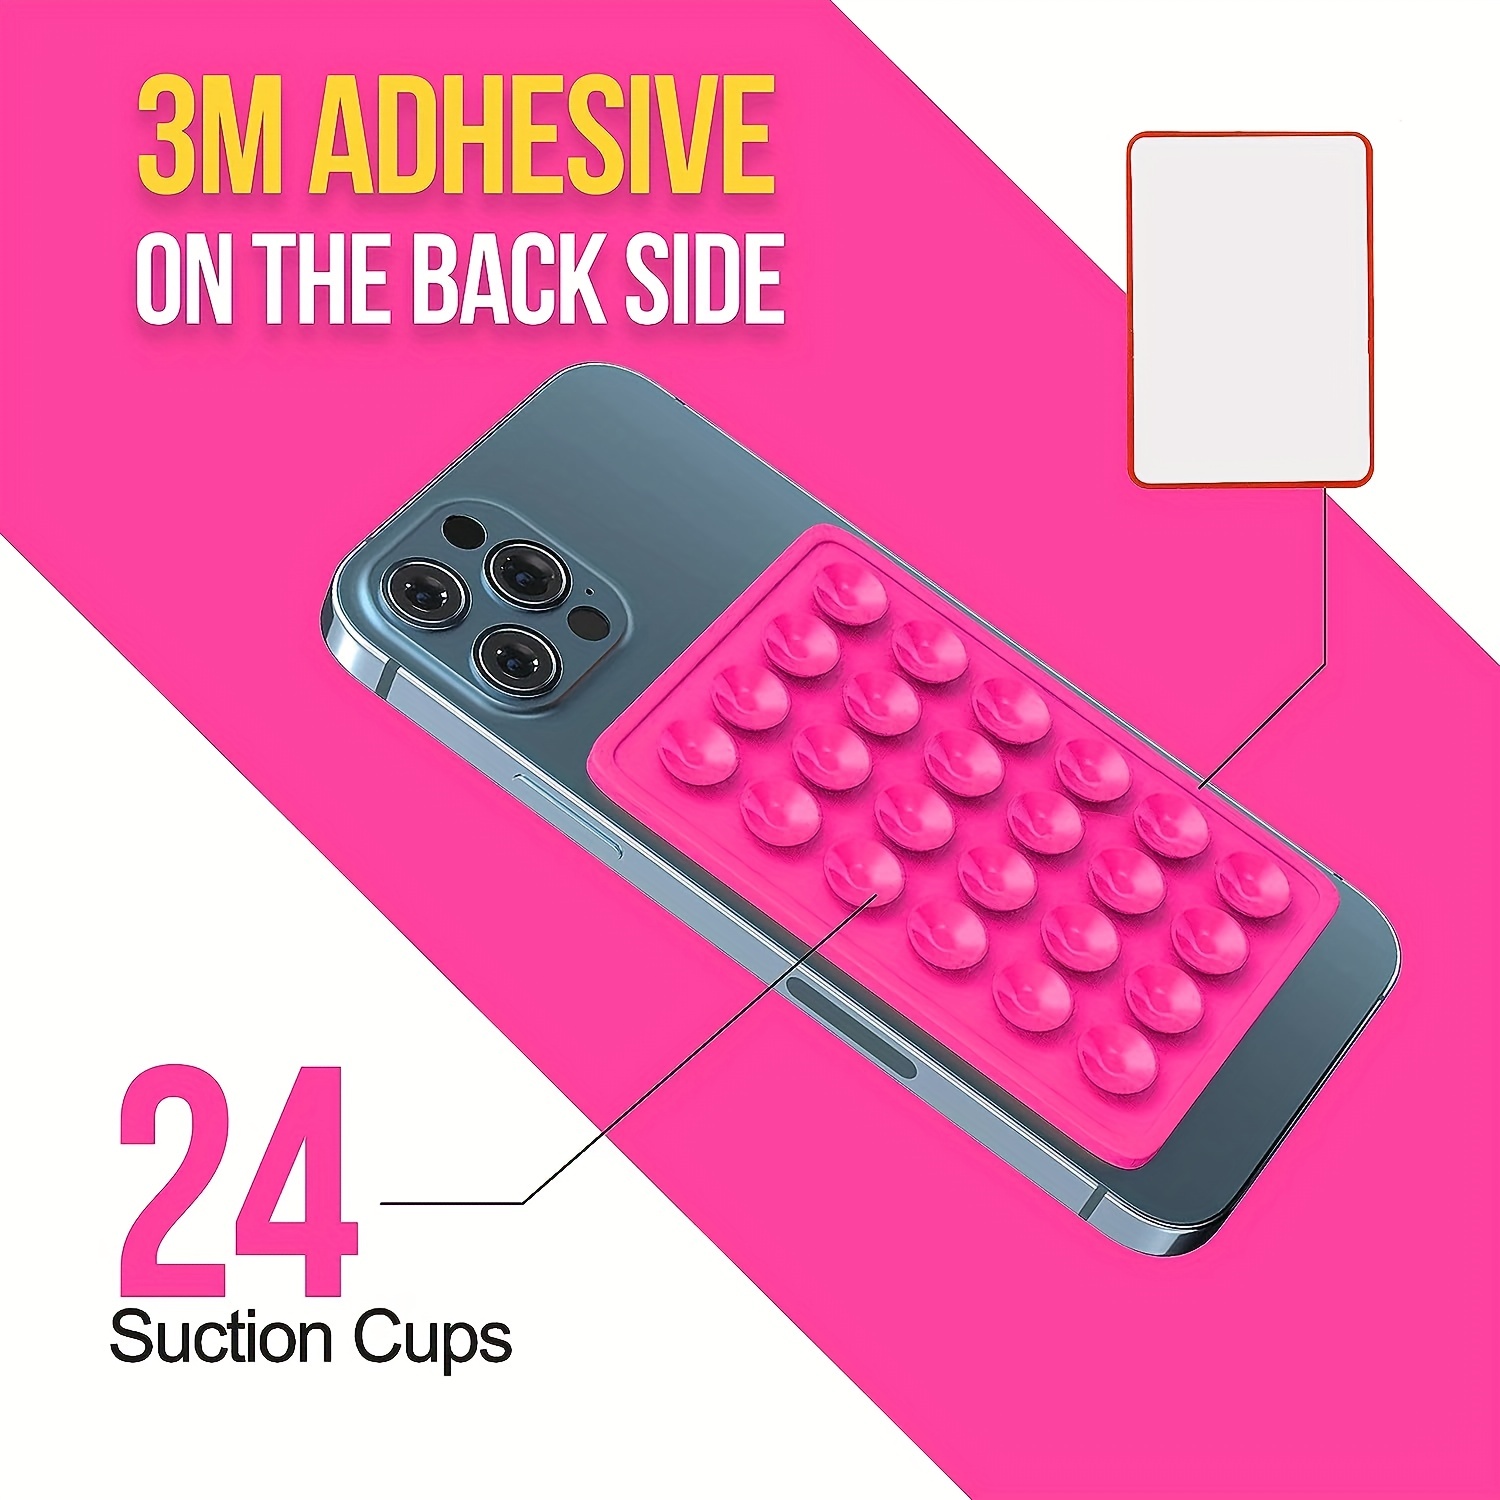 OCTOBUDDY || Silicone Suction Phone Case Adhesive Mount || (iPhone and Android Cellphone Case Compatible, Hands-Free Mobile Accessory Holder for